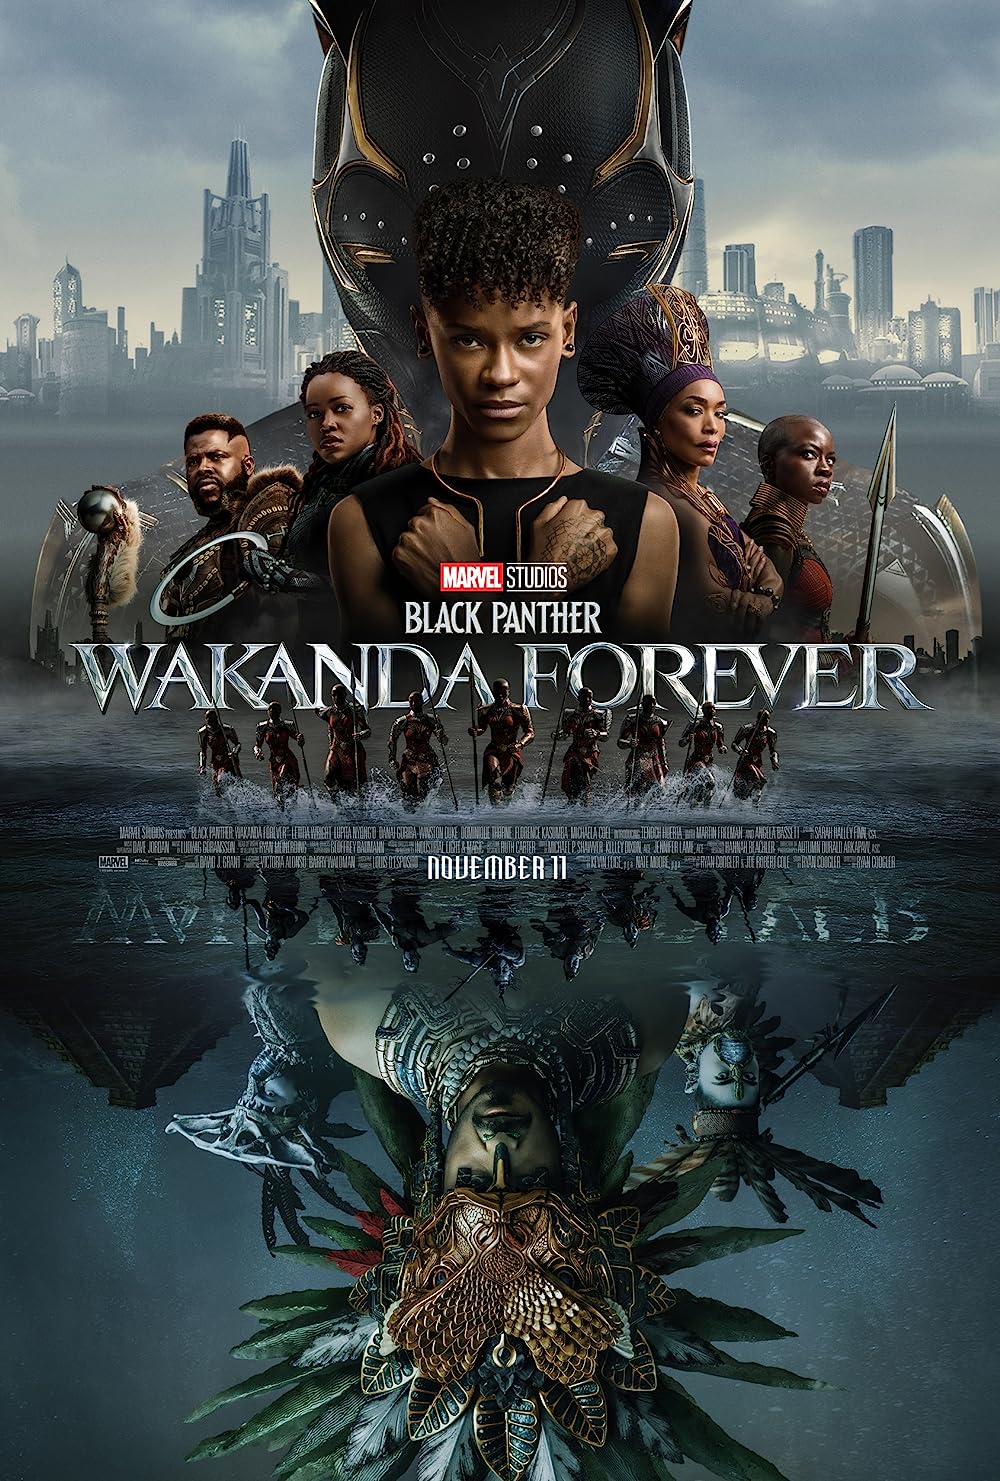 Black Panther: Wakanda Forever (November 11, 2022): In the wake of Chadwick Boseman's tragic passing, the film pays tribute to his legacy while expanding the narrative of Wakanda and its characters.